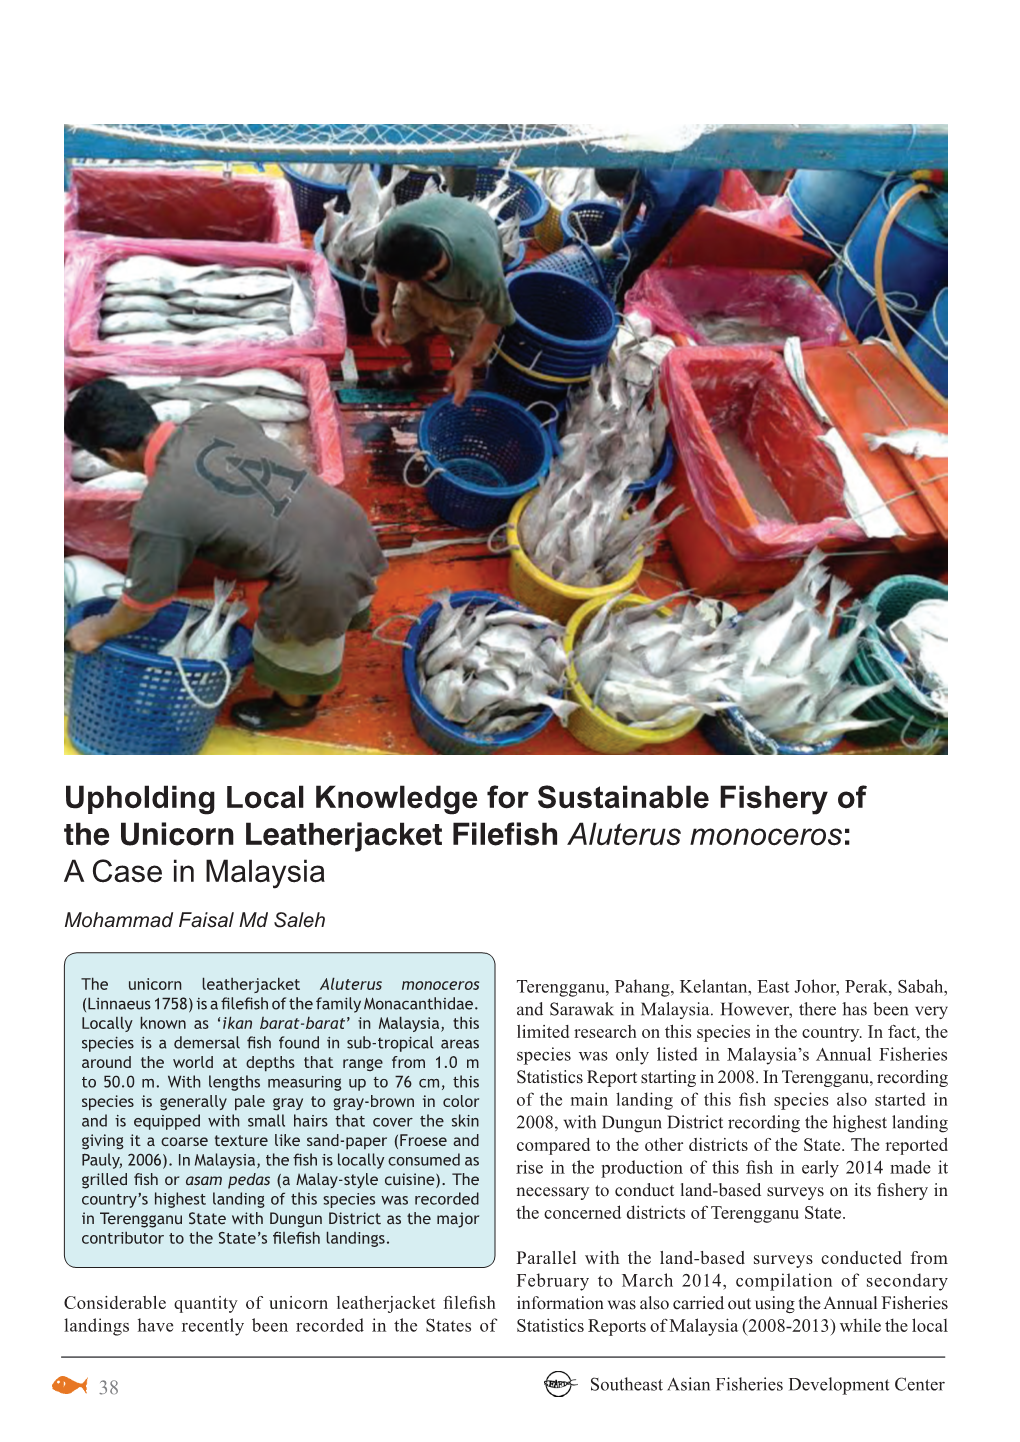 Upholding Local Knowledge for Sustainable Fishery of the Unicorn Leatherjacket Filefish Aluterus Monoceros: a Case in Malaysia